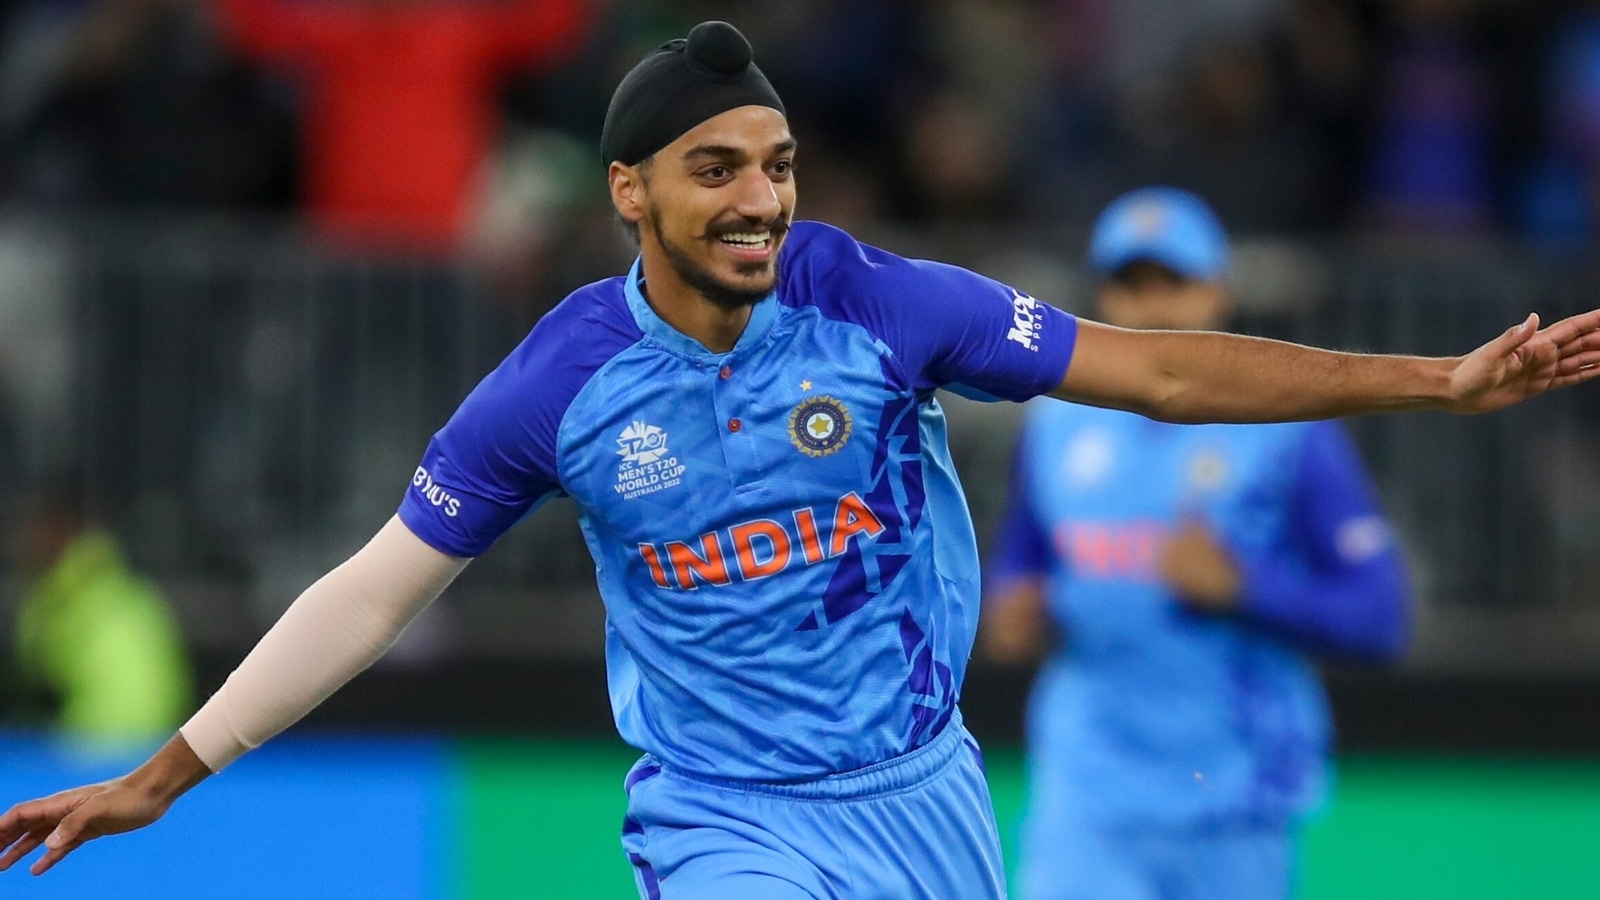 Arshdeep Singh nominated for ICC Emerging Men’s Cricketer of the Year